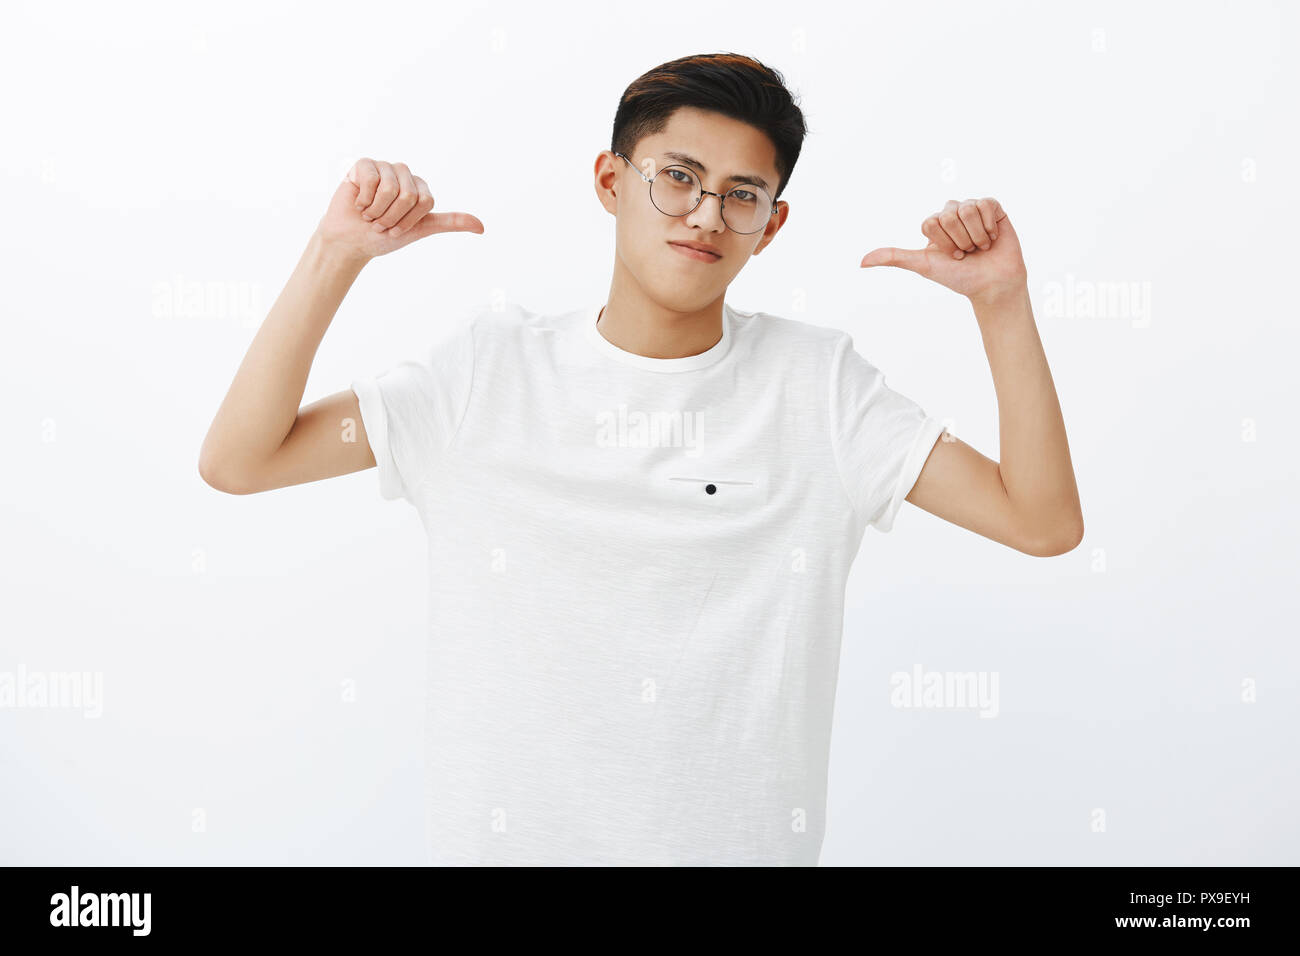 Asian guy is pro feeling proud and self-assured triumphing, being winner pointing at himself with thumbs tilting head looking confident and assertive in own skills, posing in glasses and white t-shirt Stock Photo